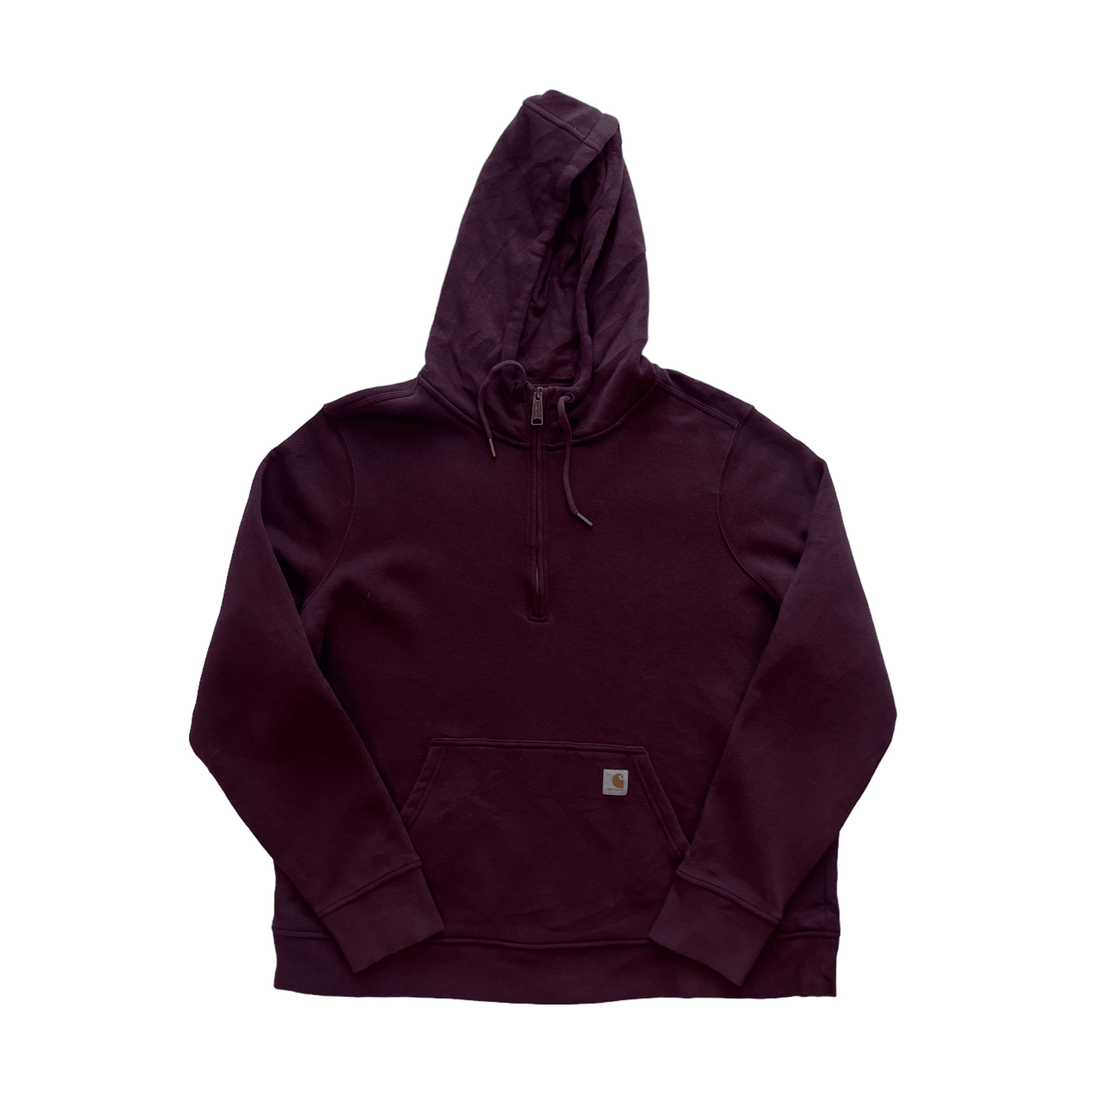 Vintage Burgundy Carhartt Quarter Zip Hoodie - Recommended Size - Extra Large - The Streetwear Studio